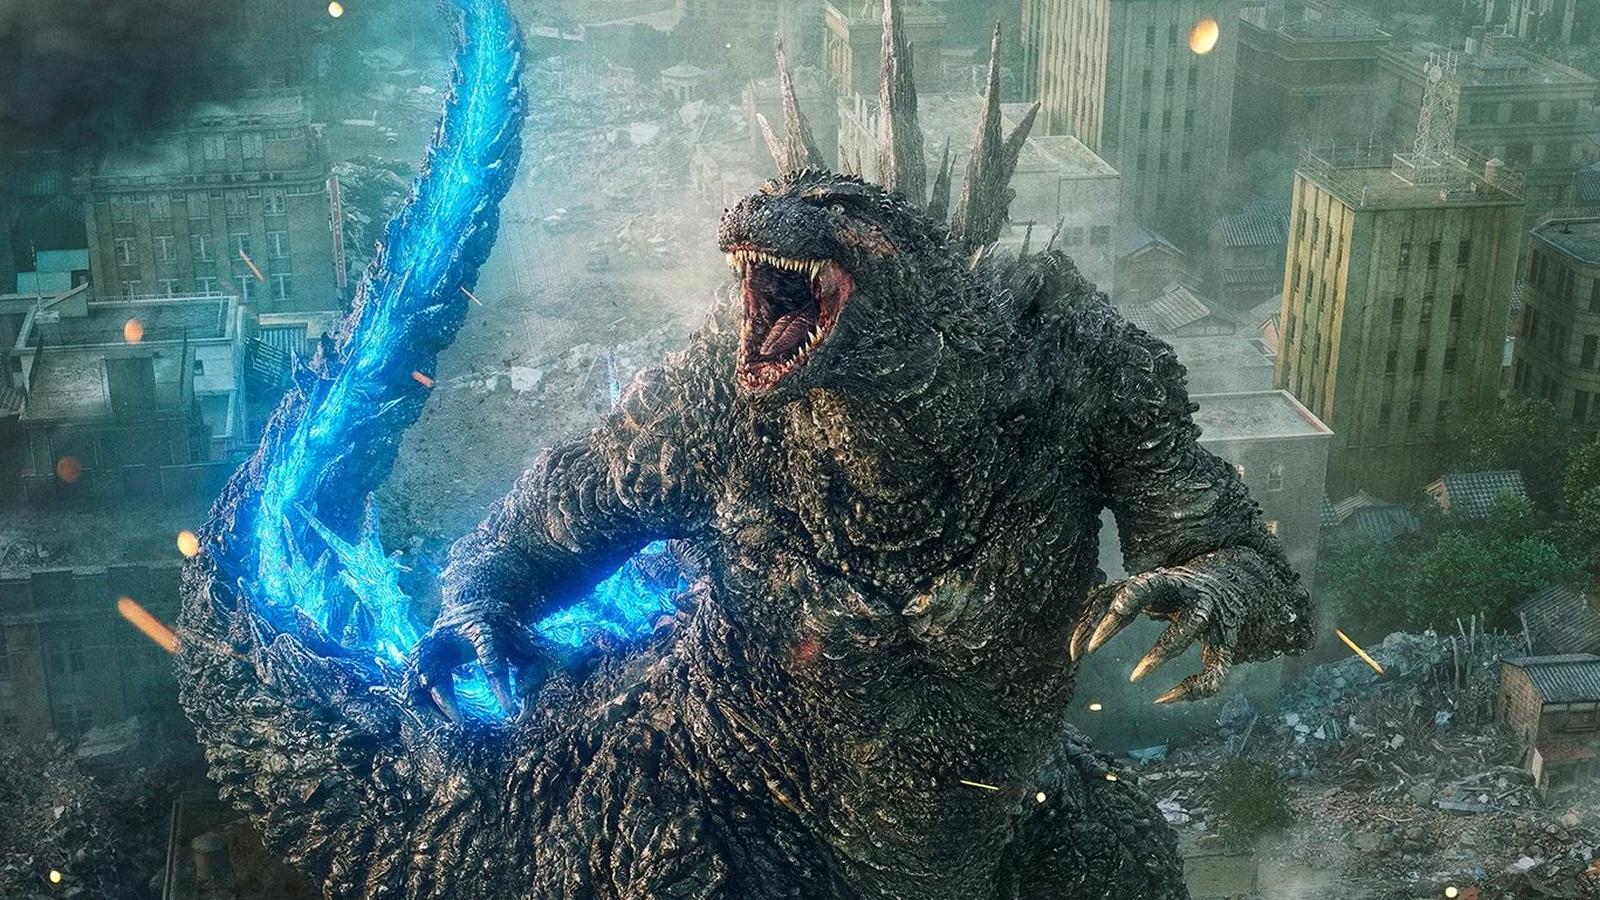 Godzilla charges up his atomic breath in a a promotional image for Godzilla Minus One.